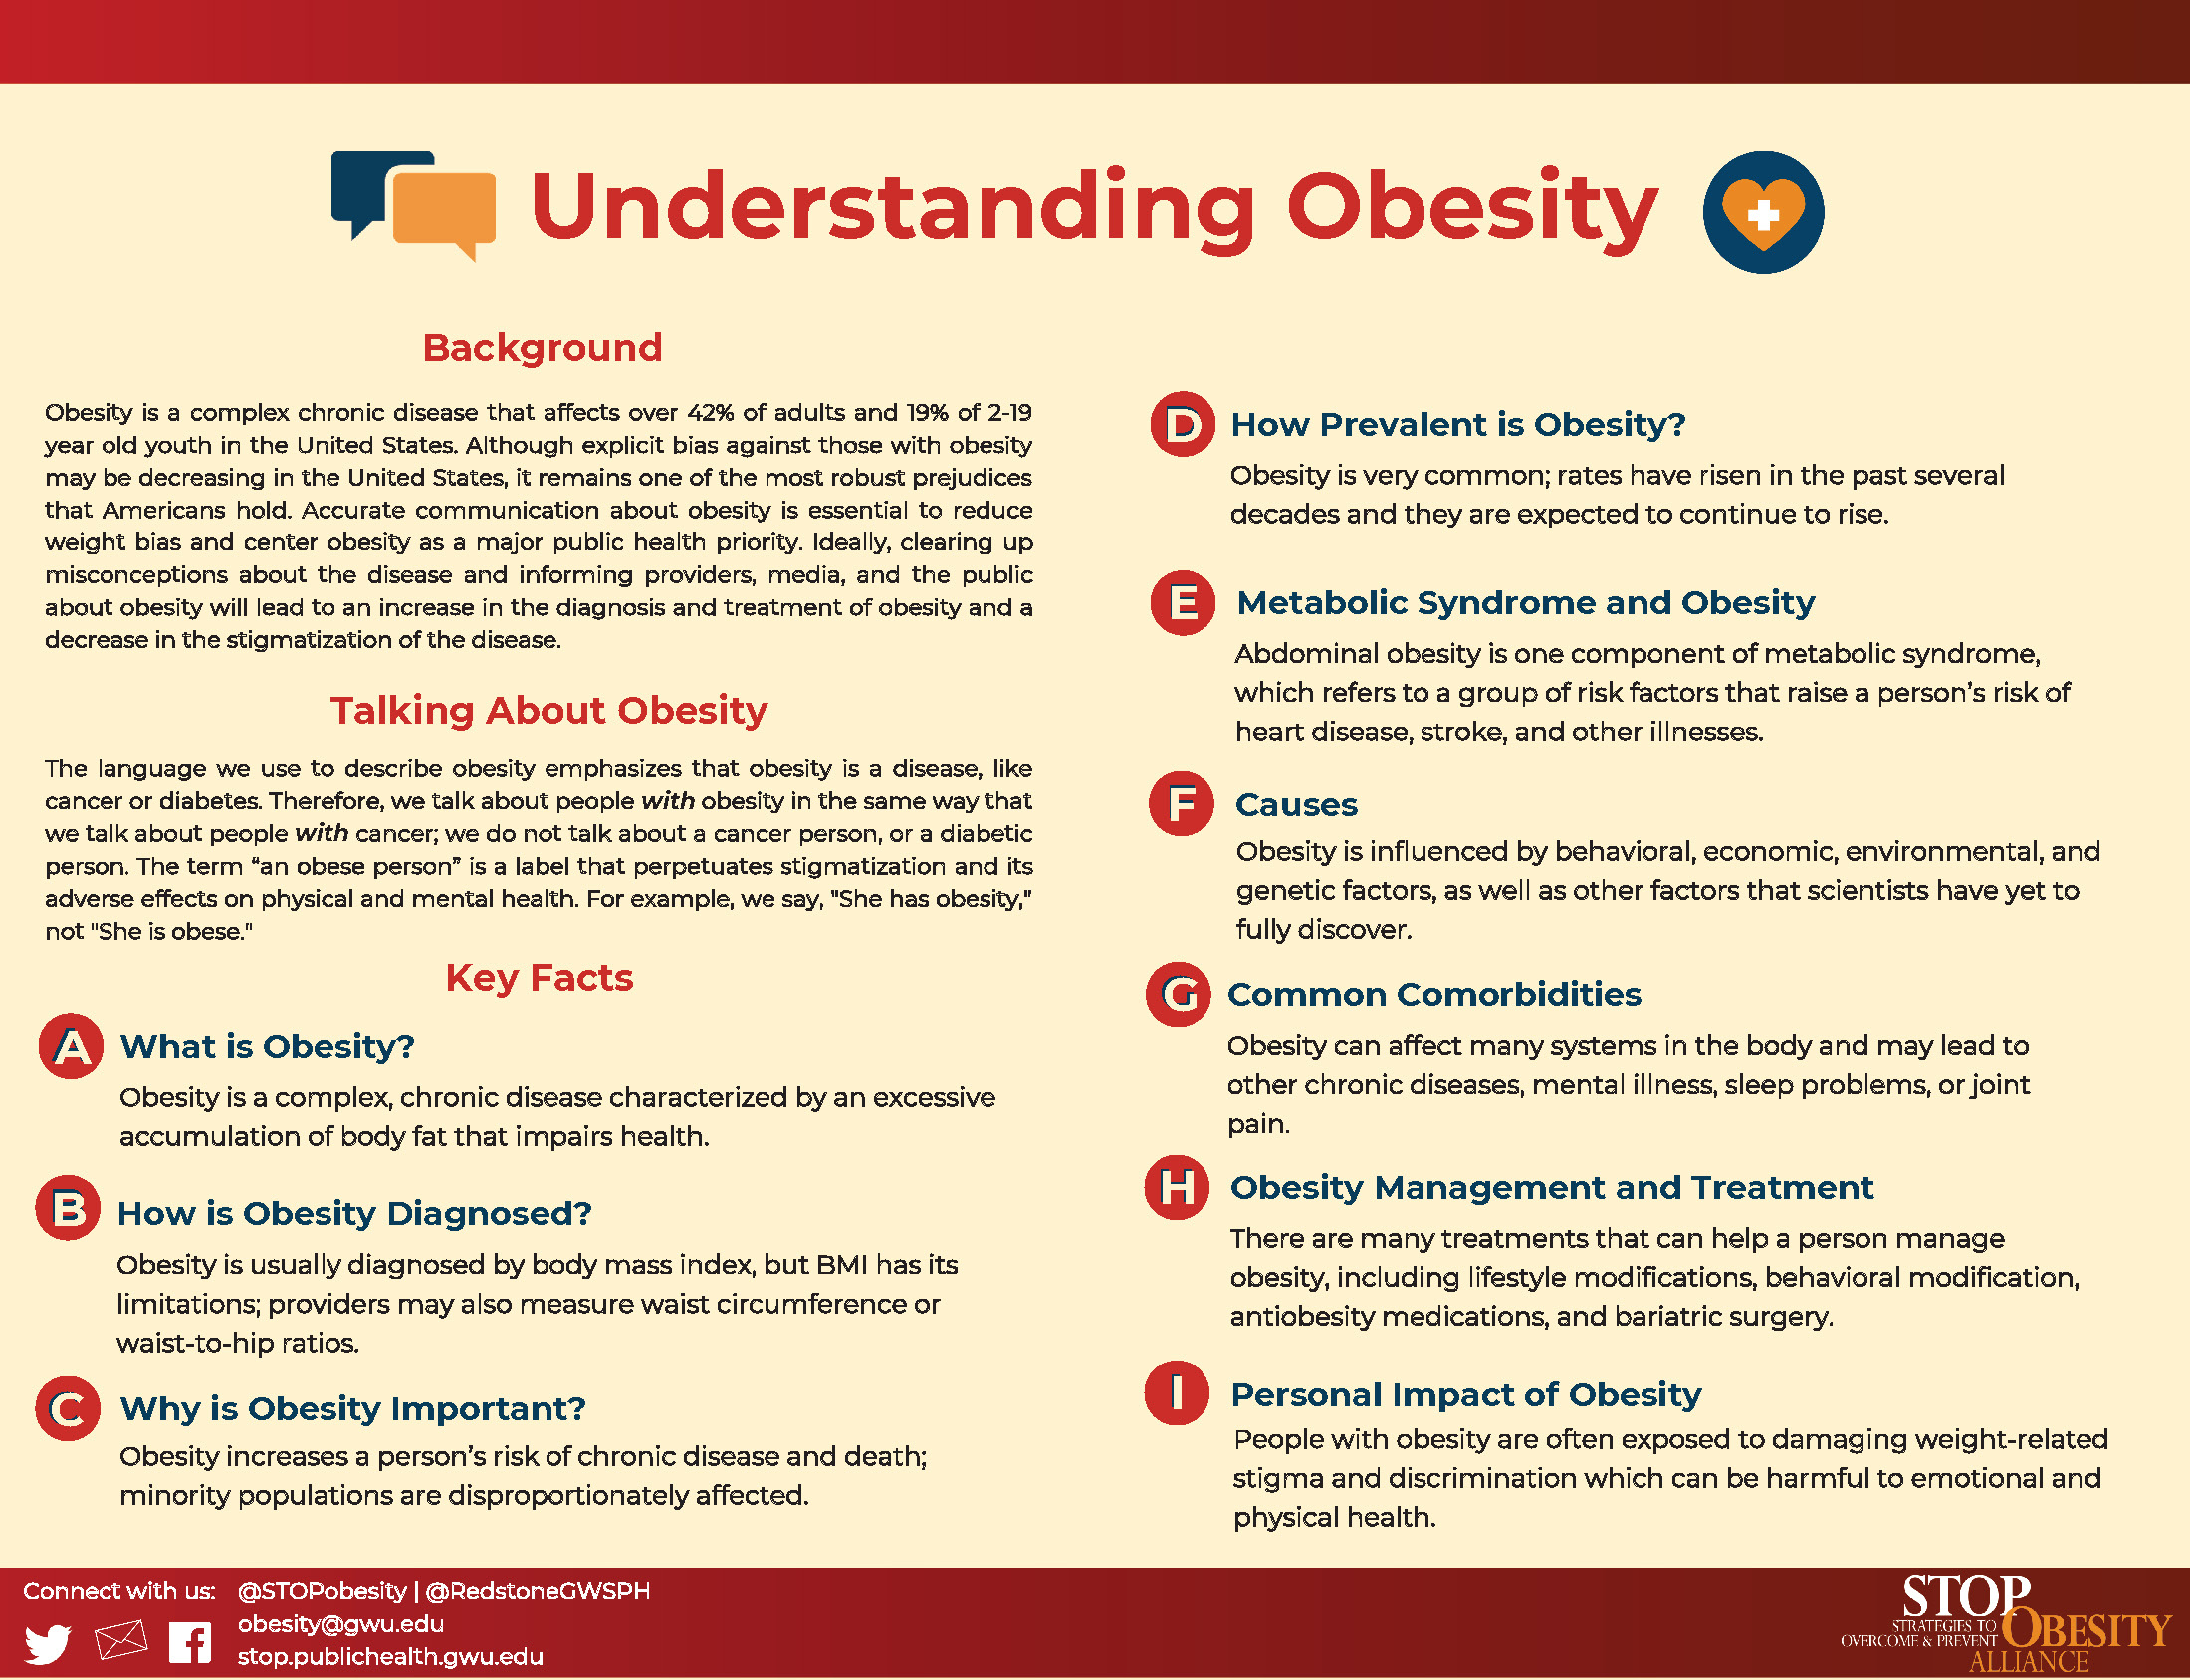 research studies related to obesity